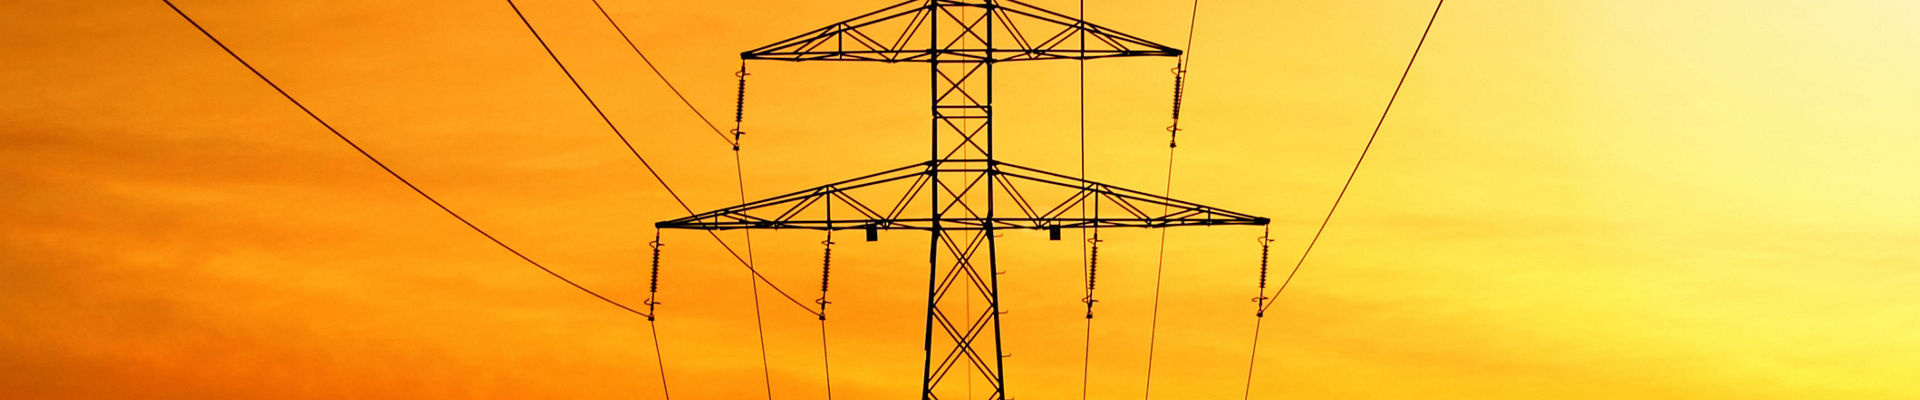 Electrical power transmission with tower at sunset